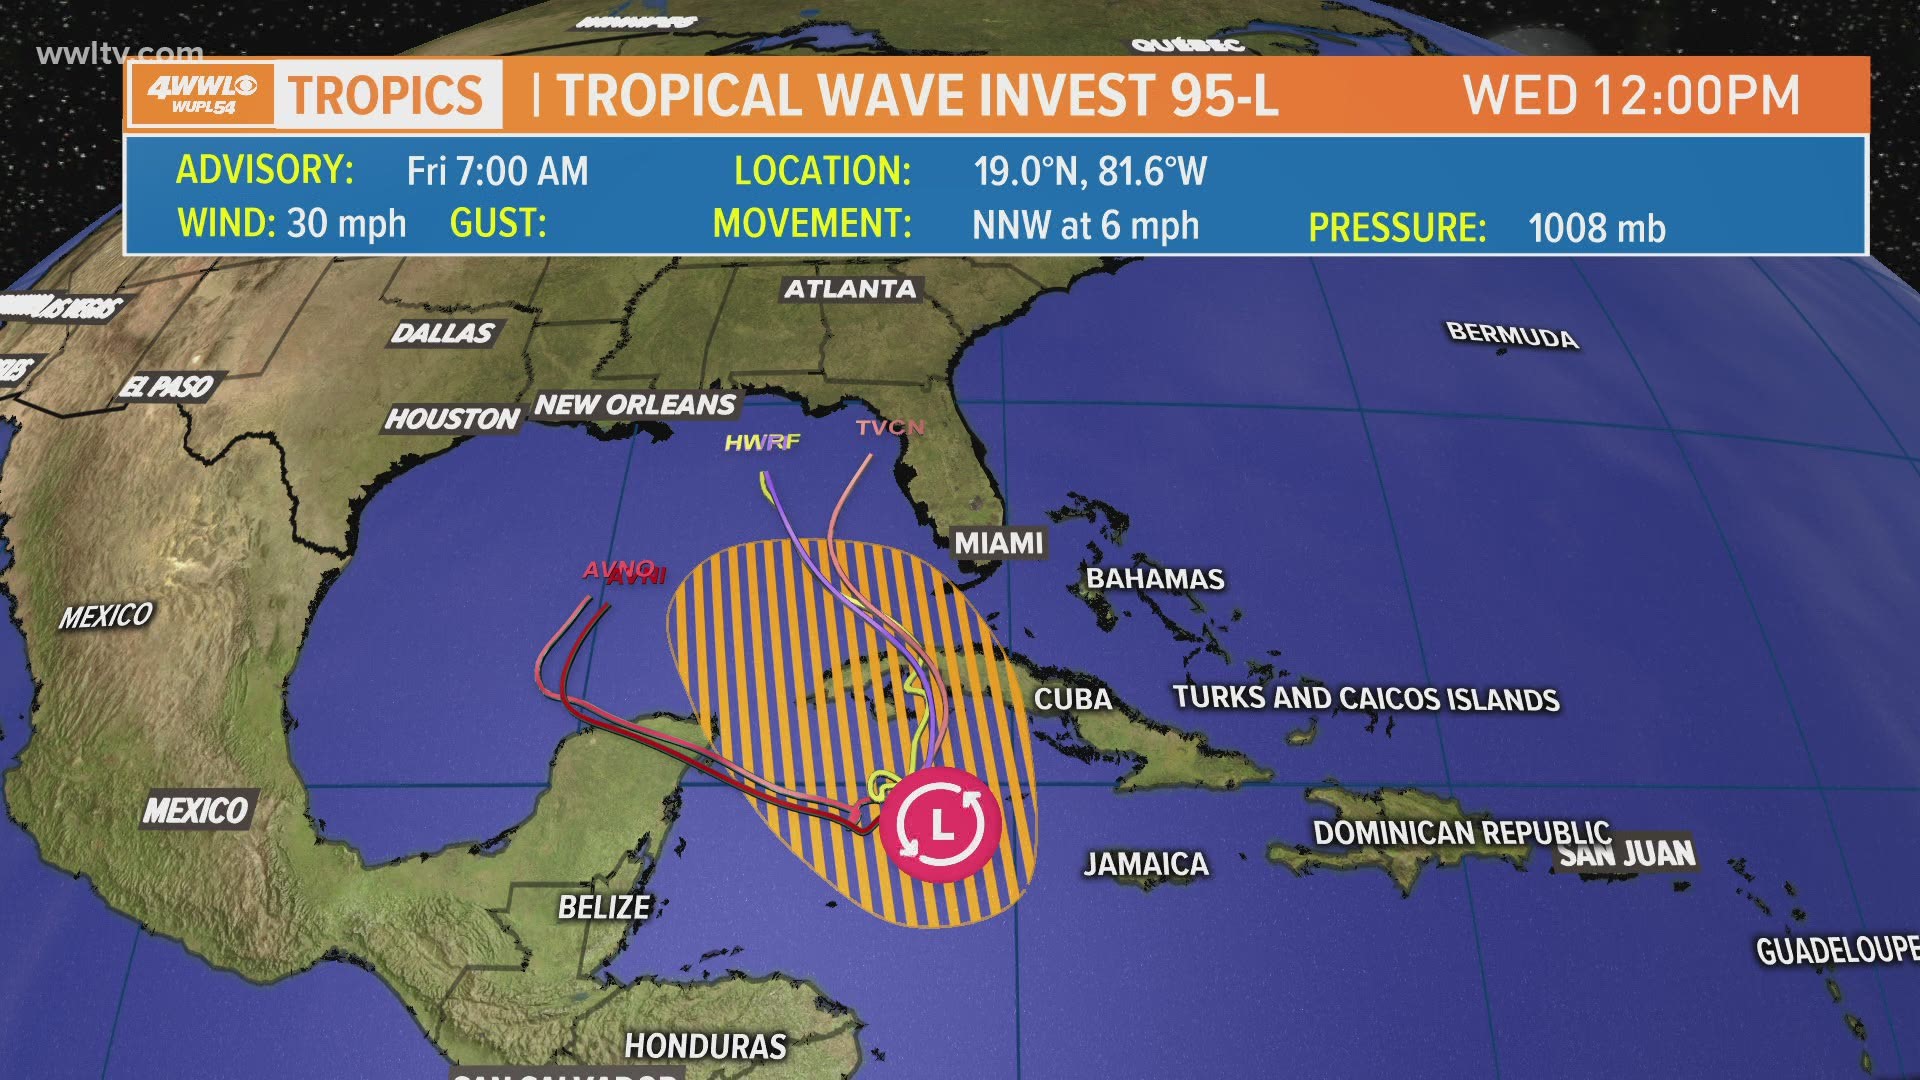 Invest 95L could become a tropical depression in the next few days and track into the eastern Gulf of Mexico